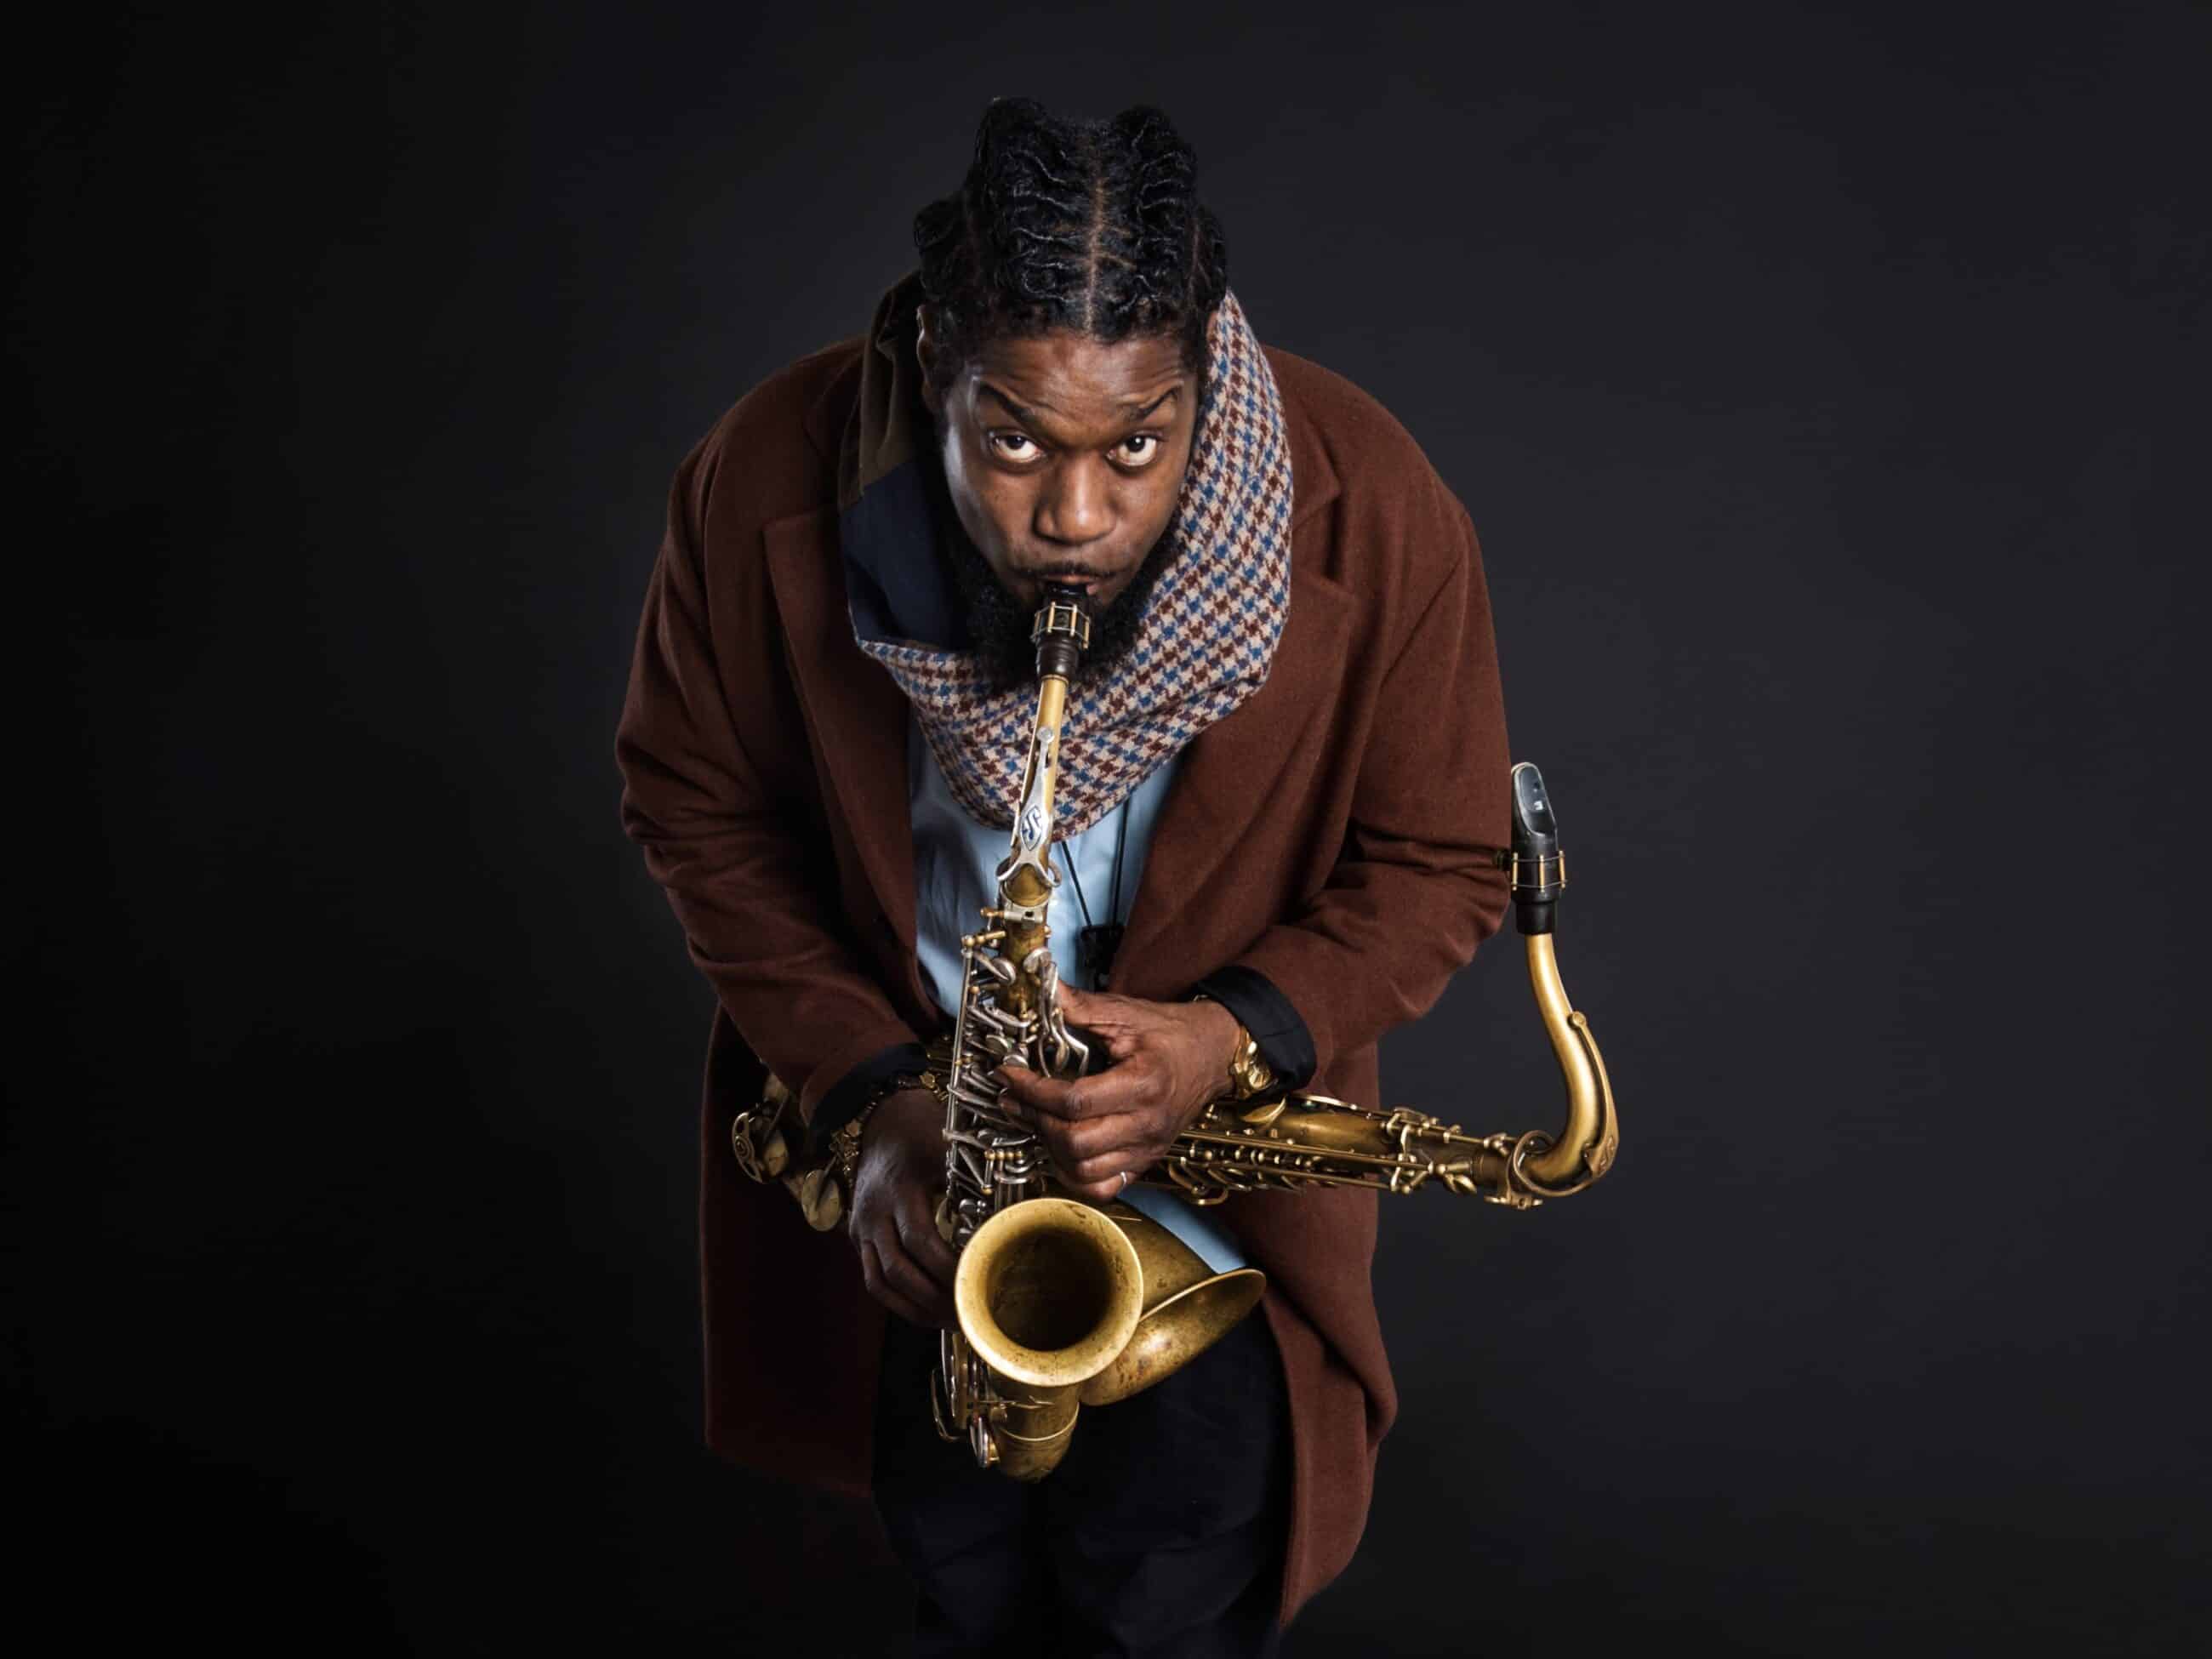 Soweto Kinch poses with his saxophone on a black background.